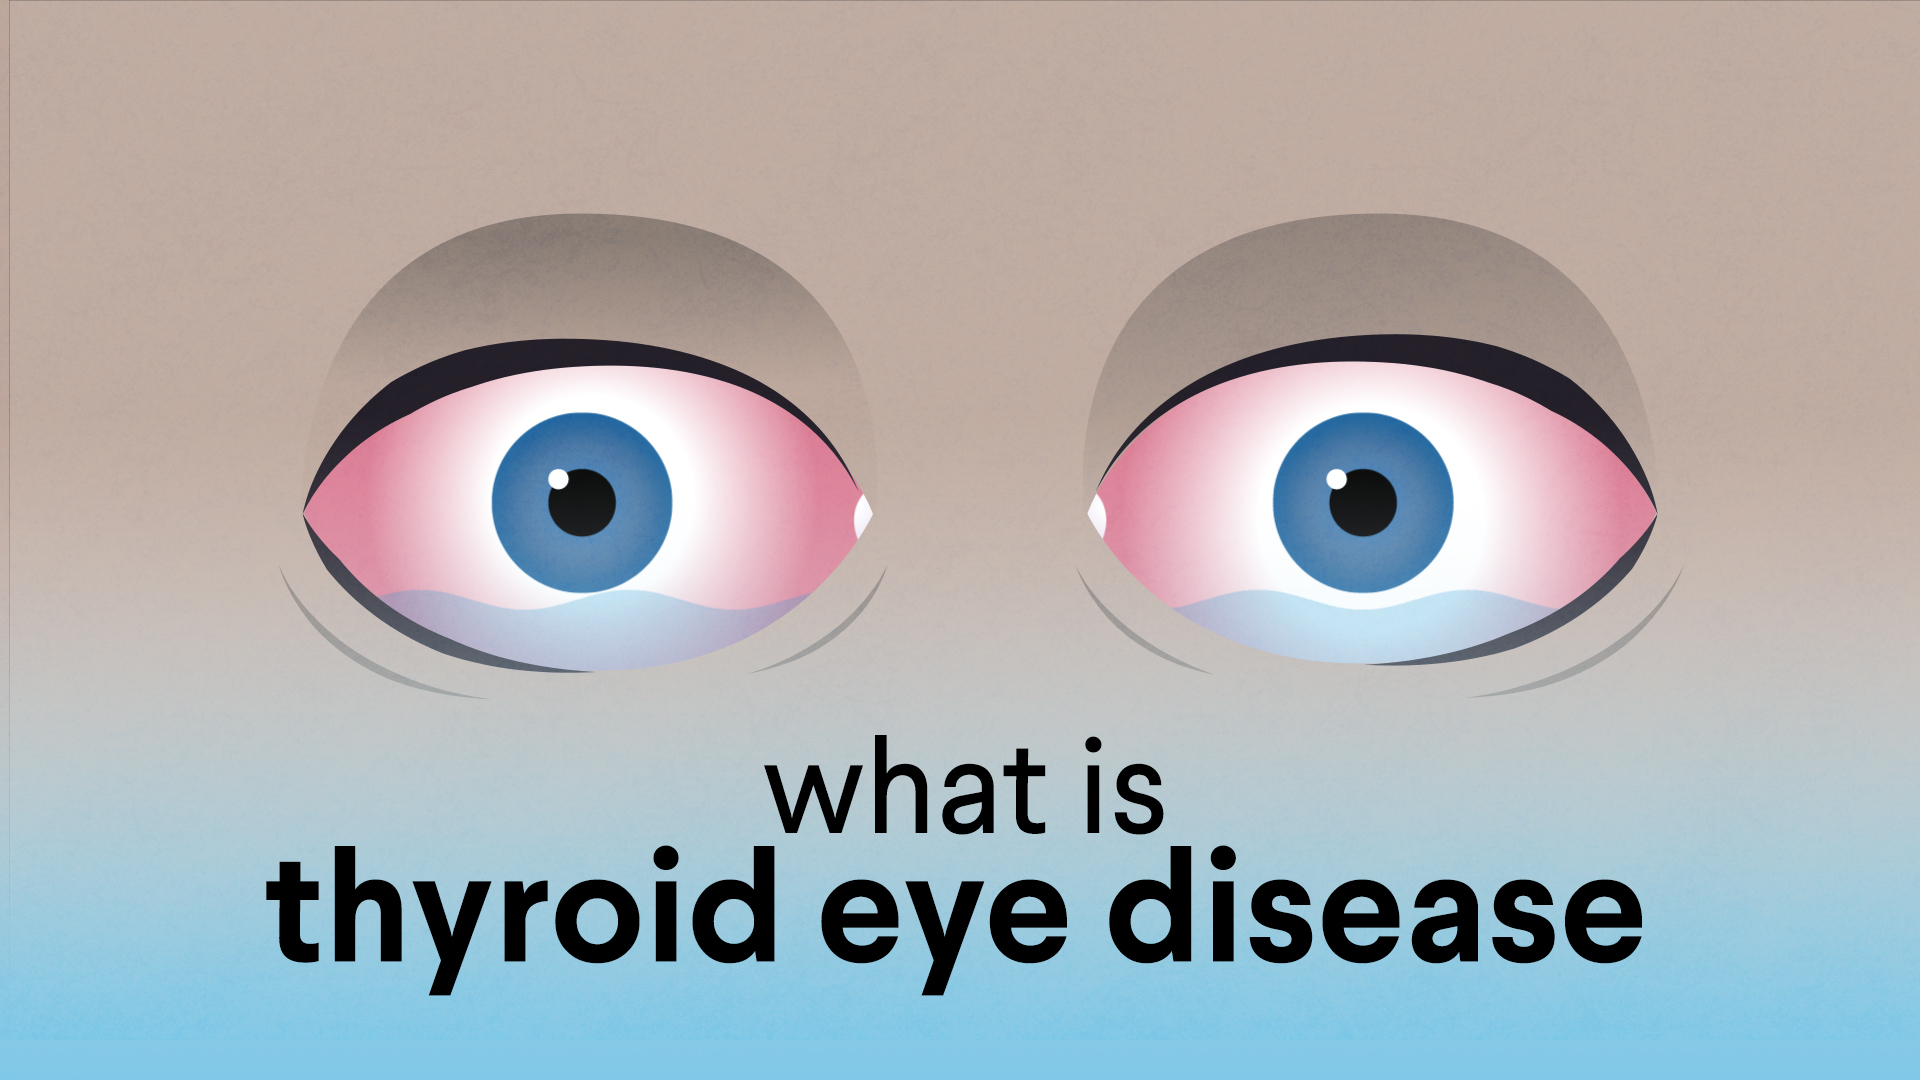 What Is Thyroid Eye Disease? | American Association of Clinical